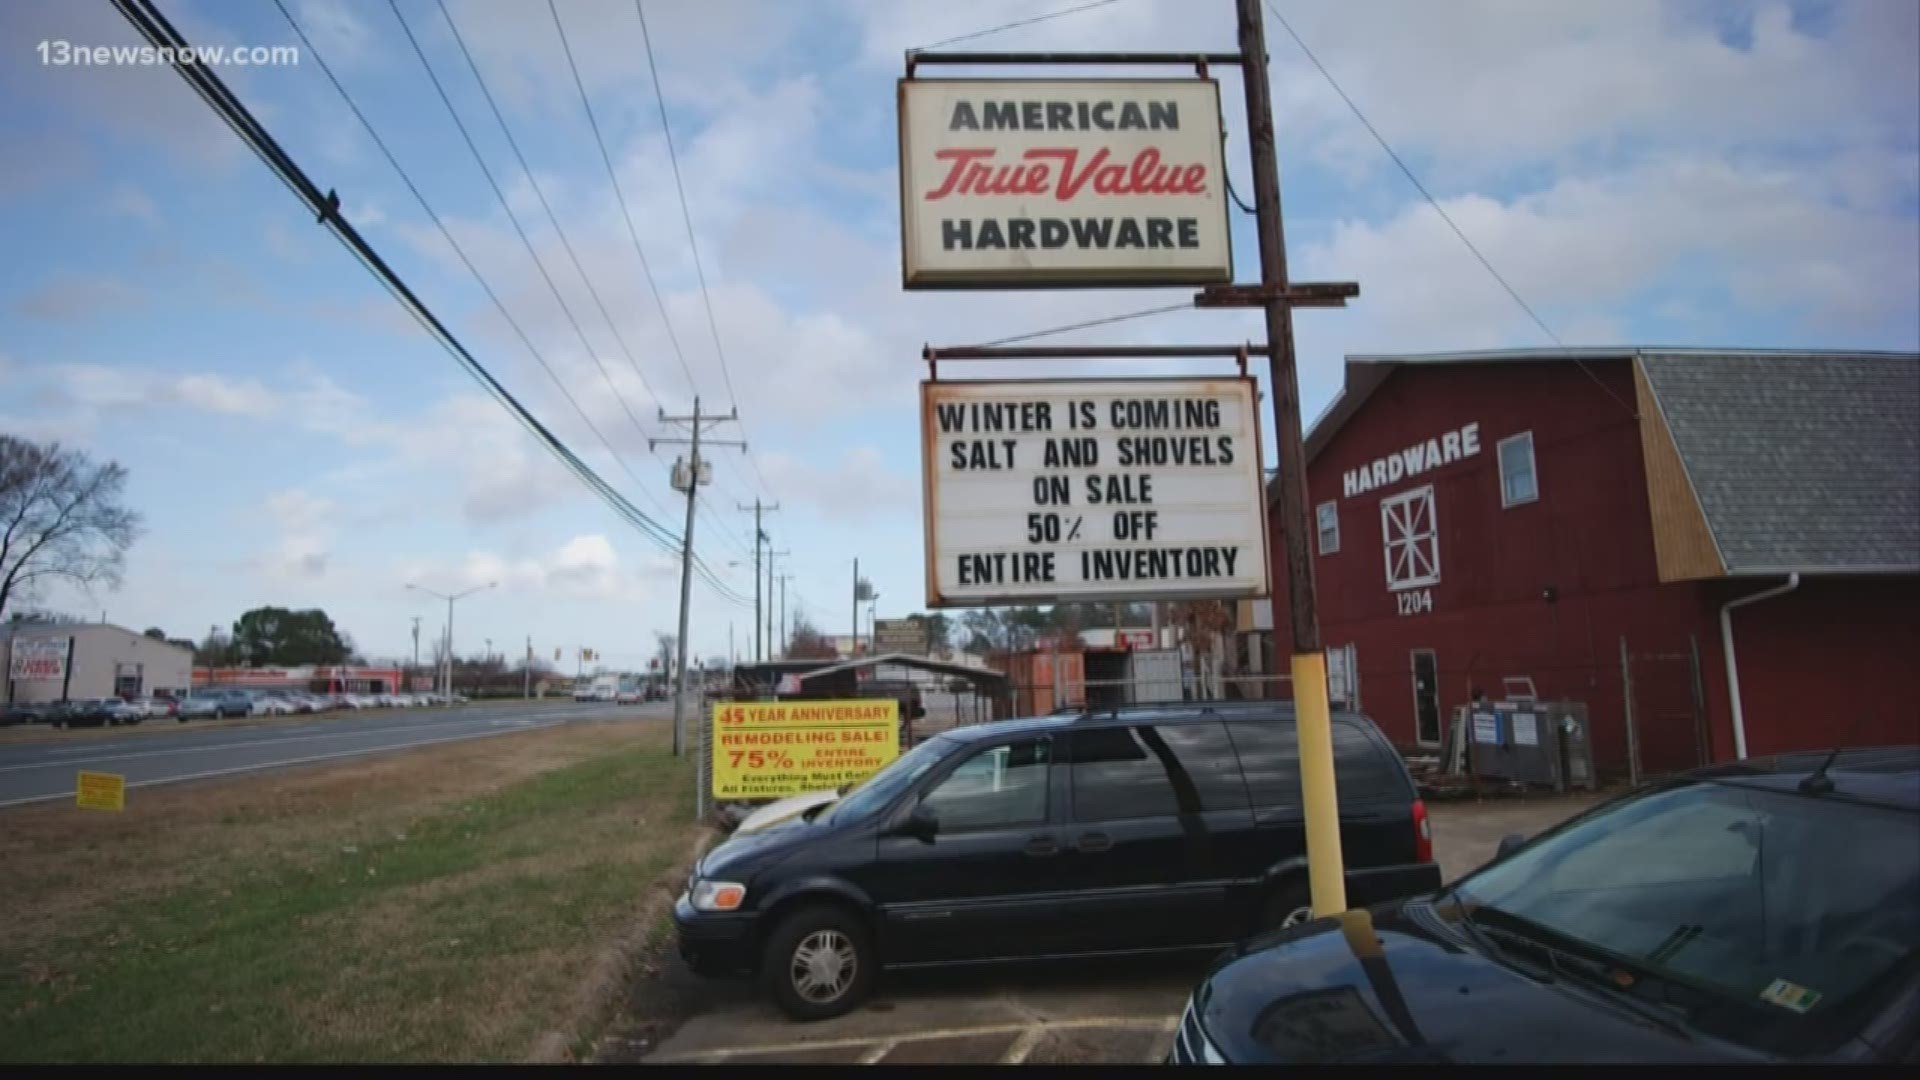 American True Value Hardware Store, a mom-and-pop shop, in Chesapeake is closing on December 31, but this is different than any other hardware store.